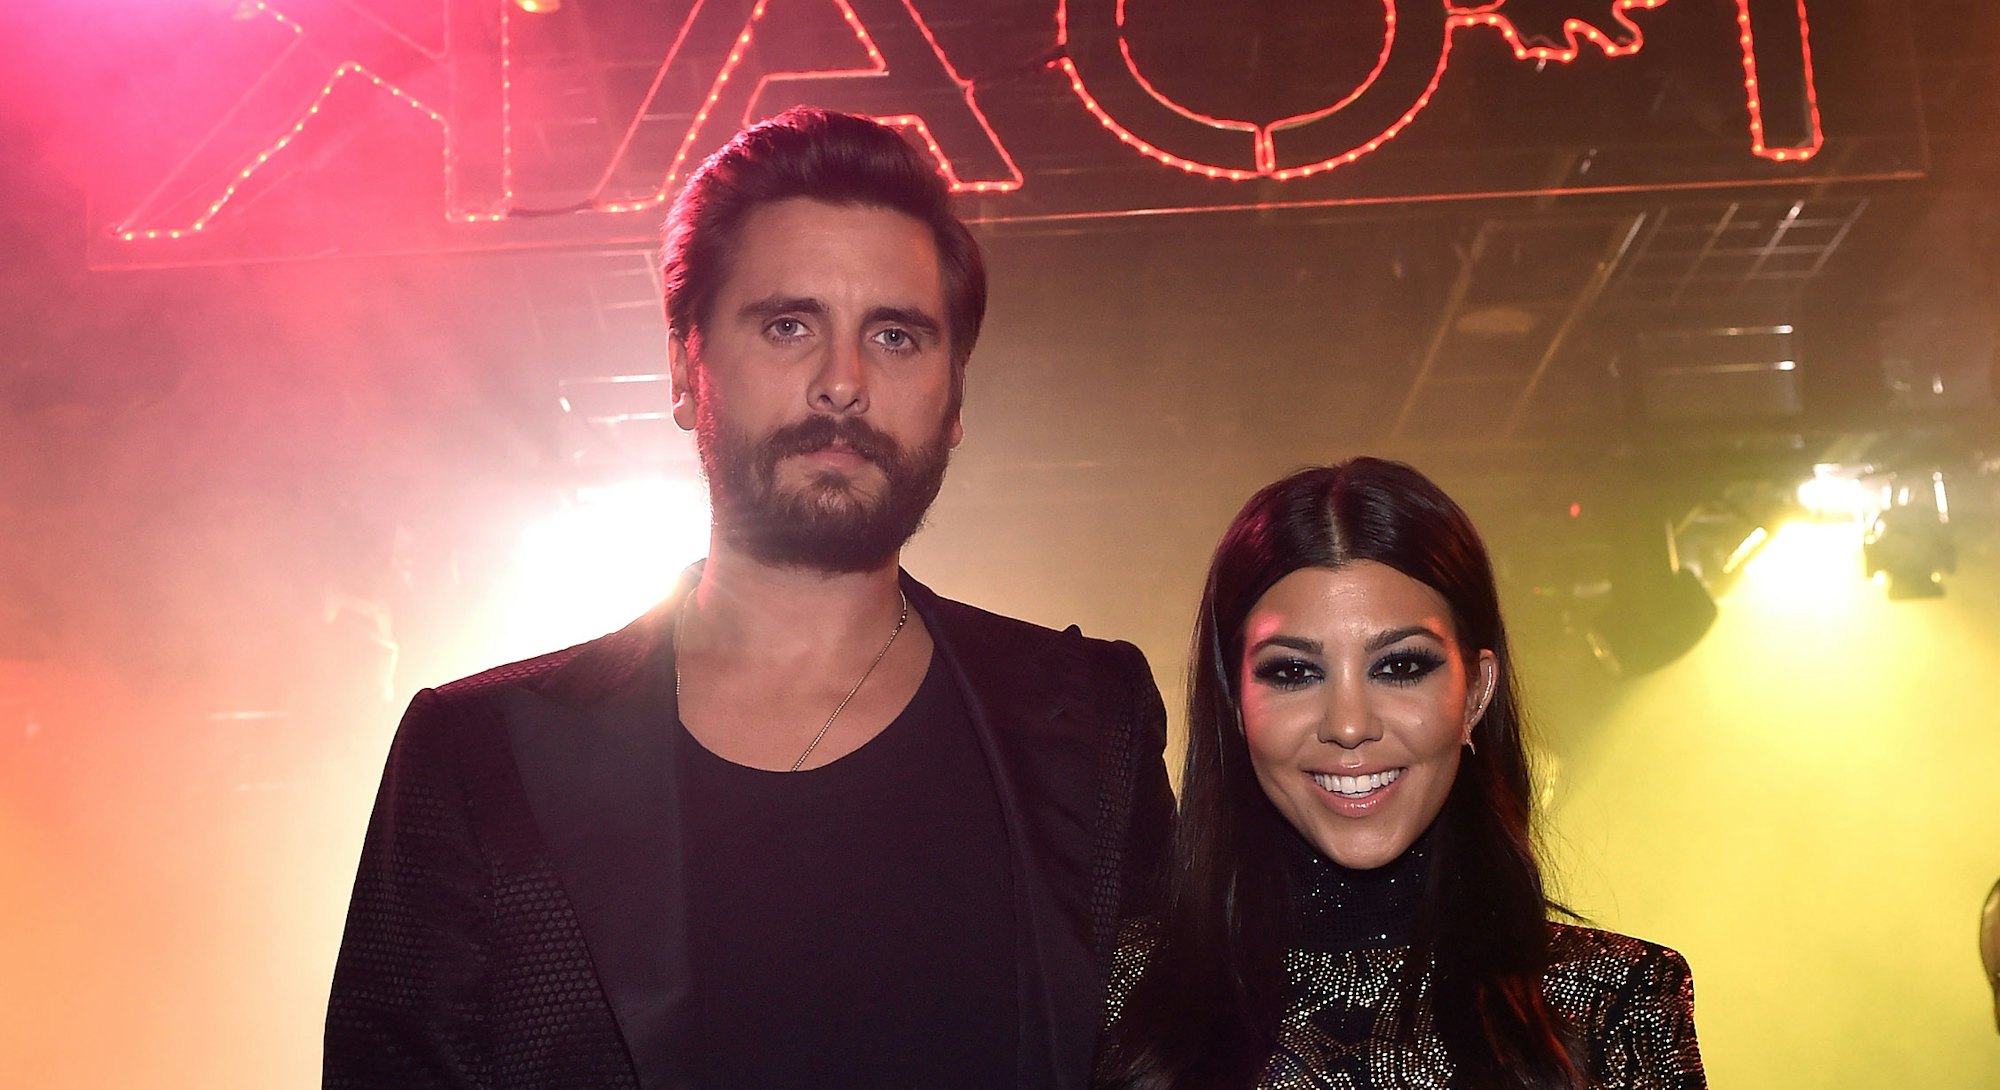 LAS VEGAS, NV - MAY 23:  (EXCLUSIVE COVERAGE) Television personalities Scott Disick (L) and Kourtney...